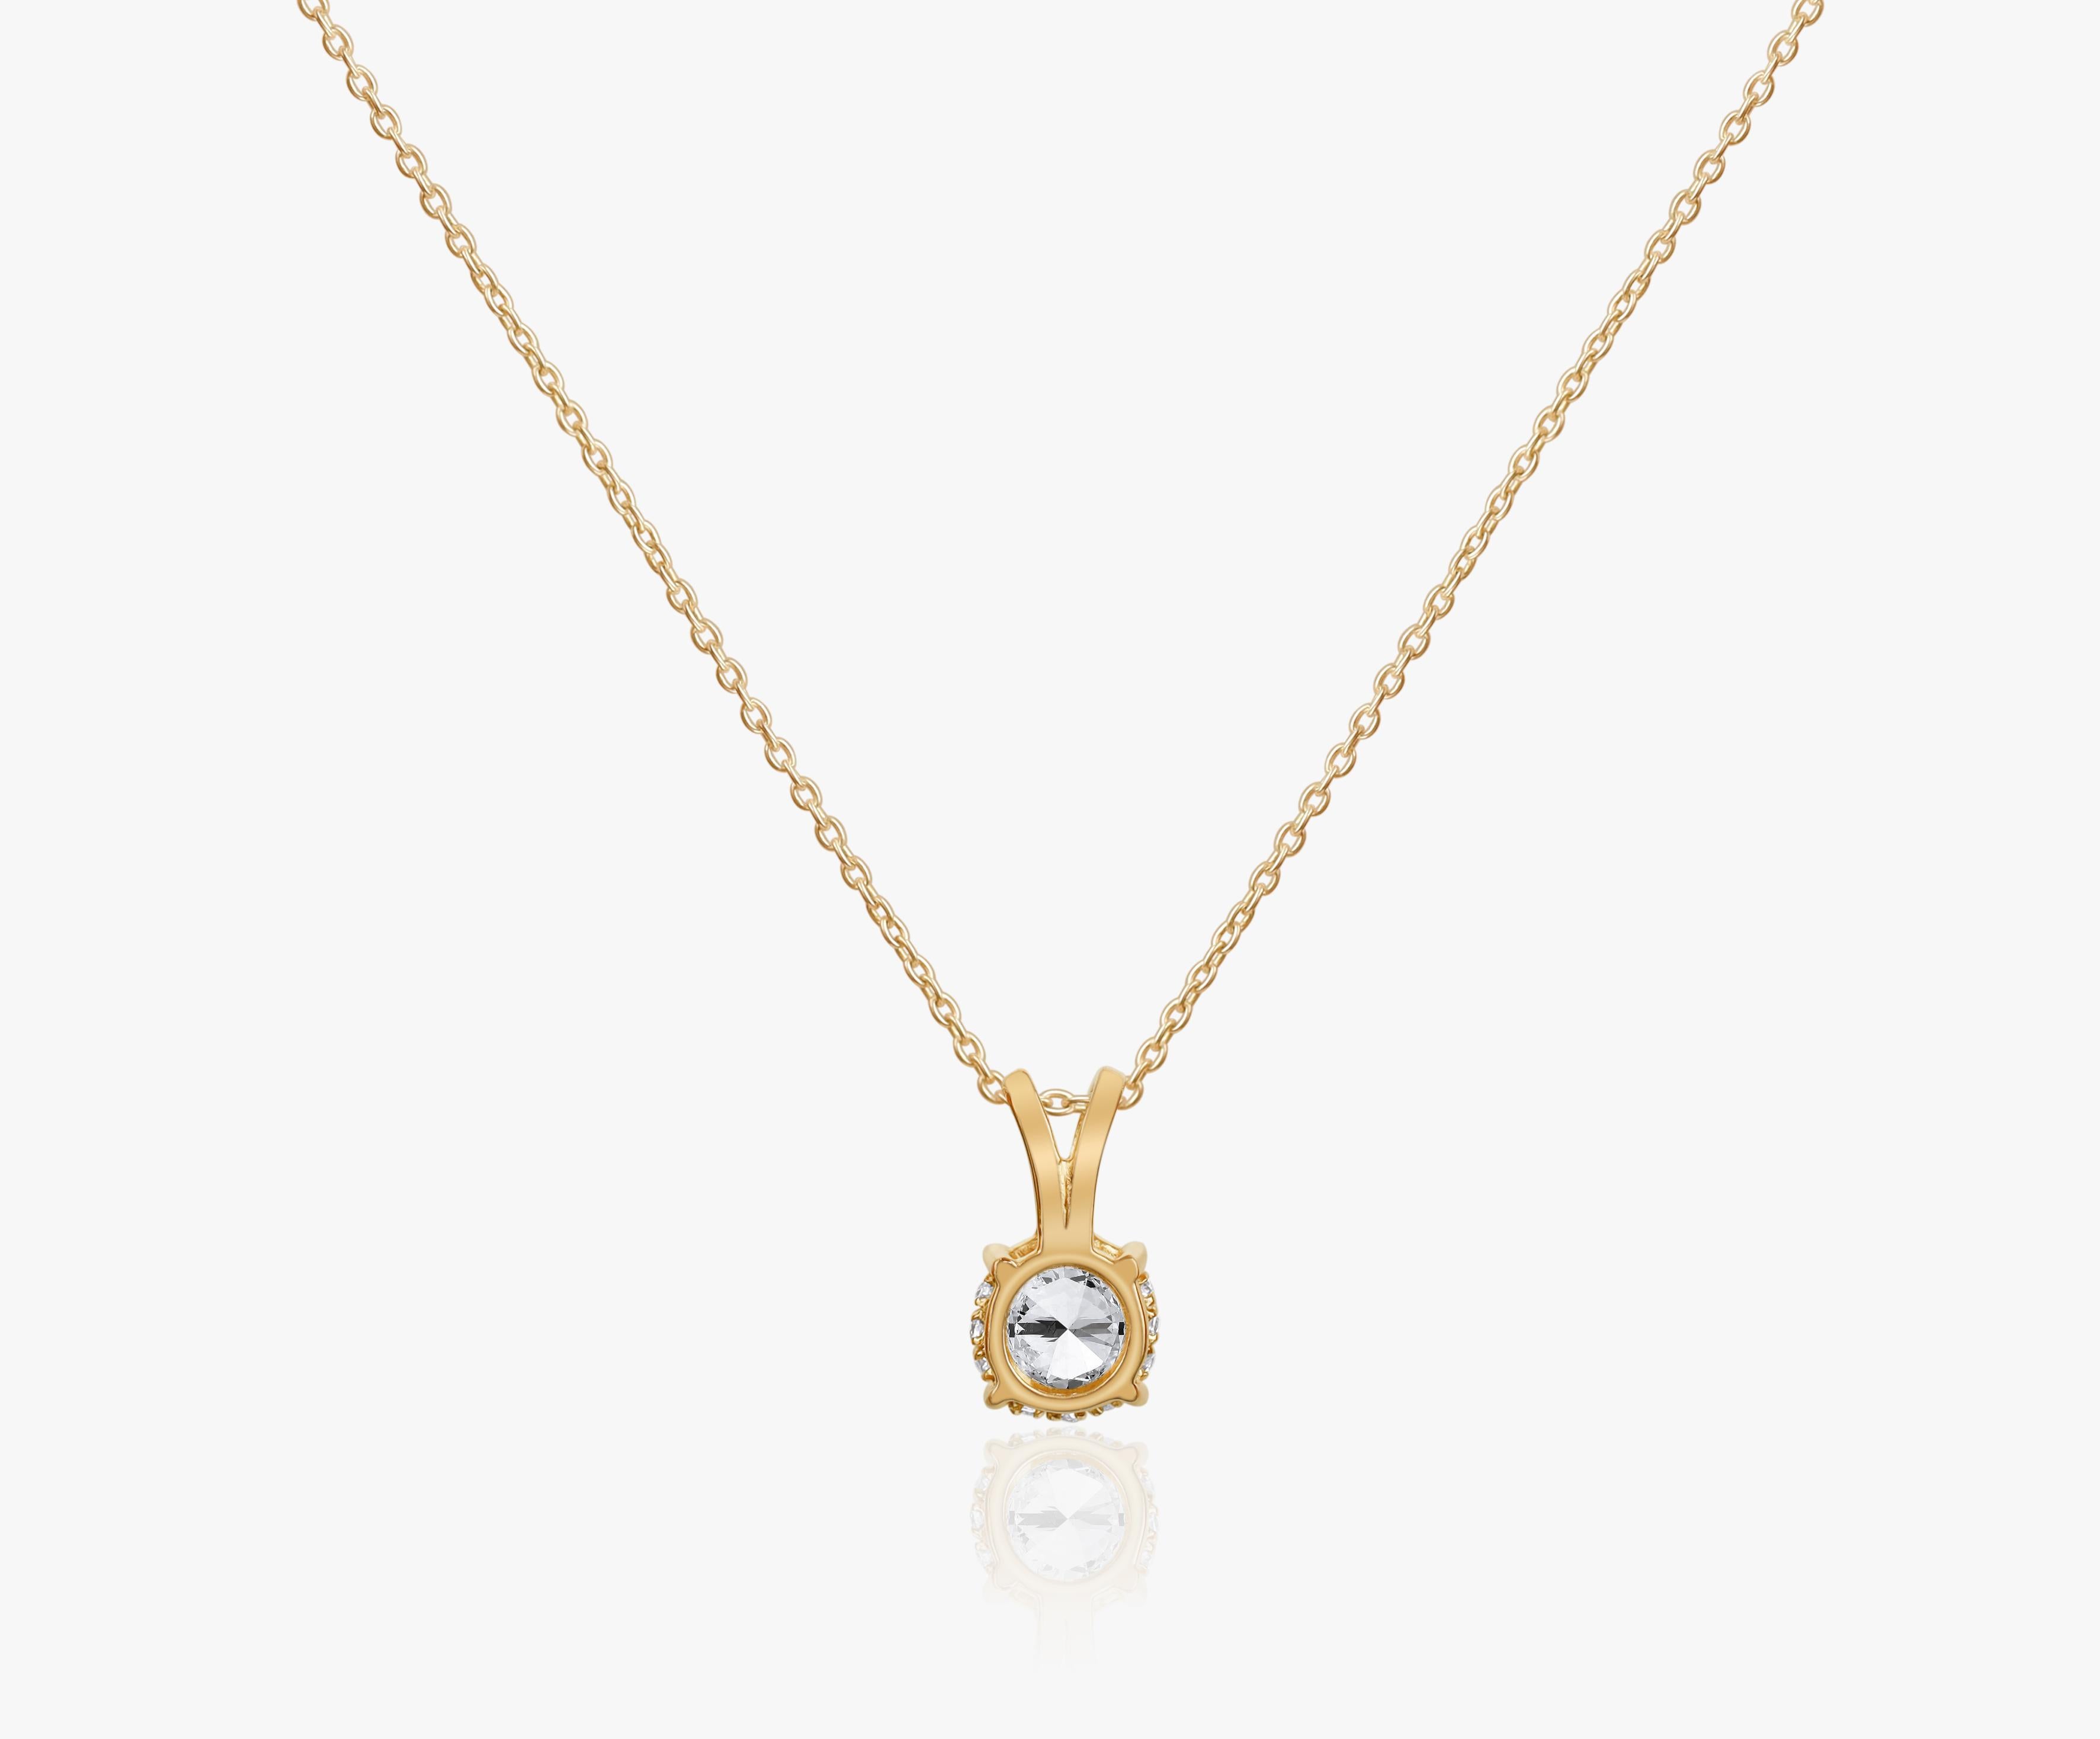 Oval Cut GIA Report Certified 1.5 Carat D Colorless IF Round Cut Diamond Pendant Necklace For Sale